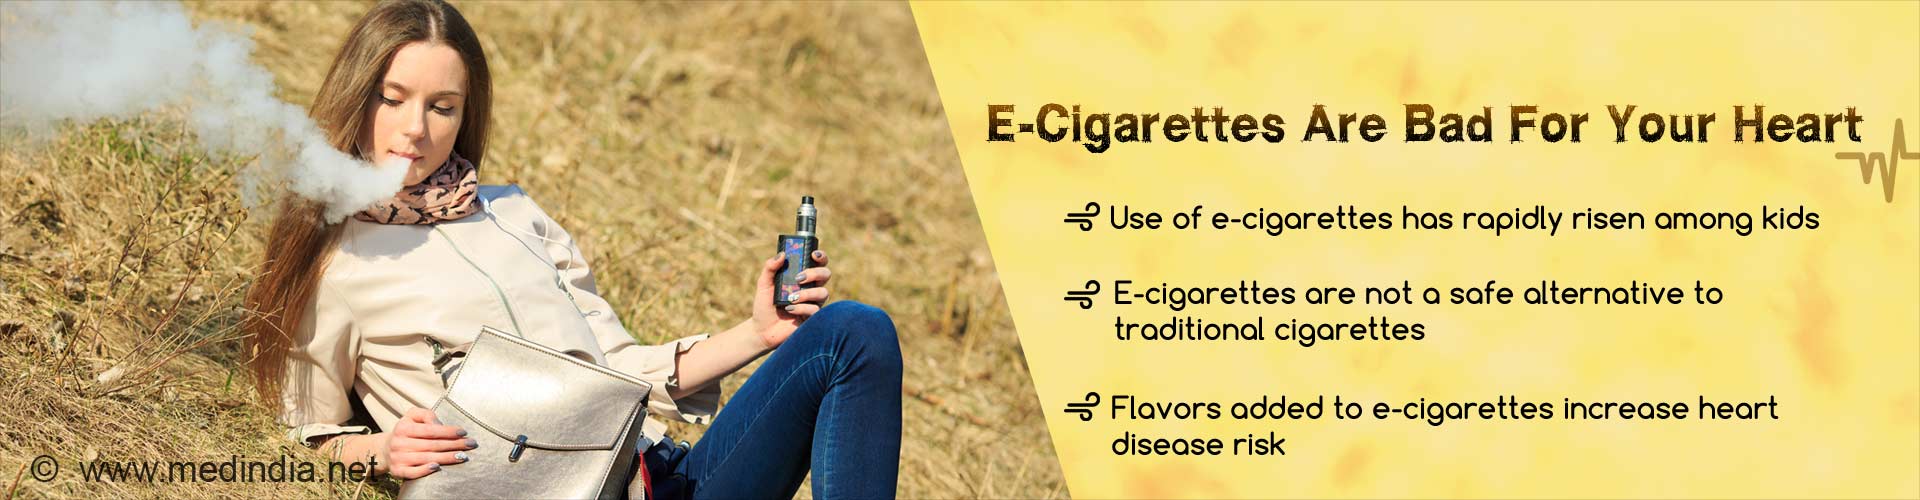 E-cigarettes are bad for your heart. Use of e-cigarettes has rapidly risen among kids. E-cigarettes are not a safe alternative to traditional cigarettes. Flavors added to e-cigarettes increase heart disease risk.